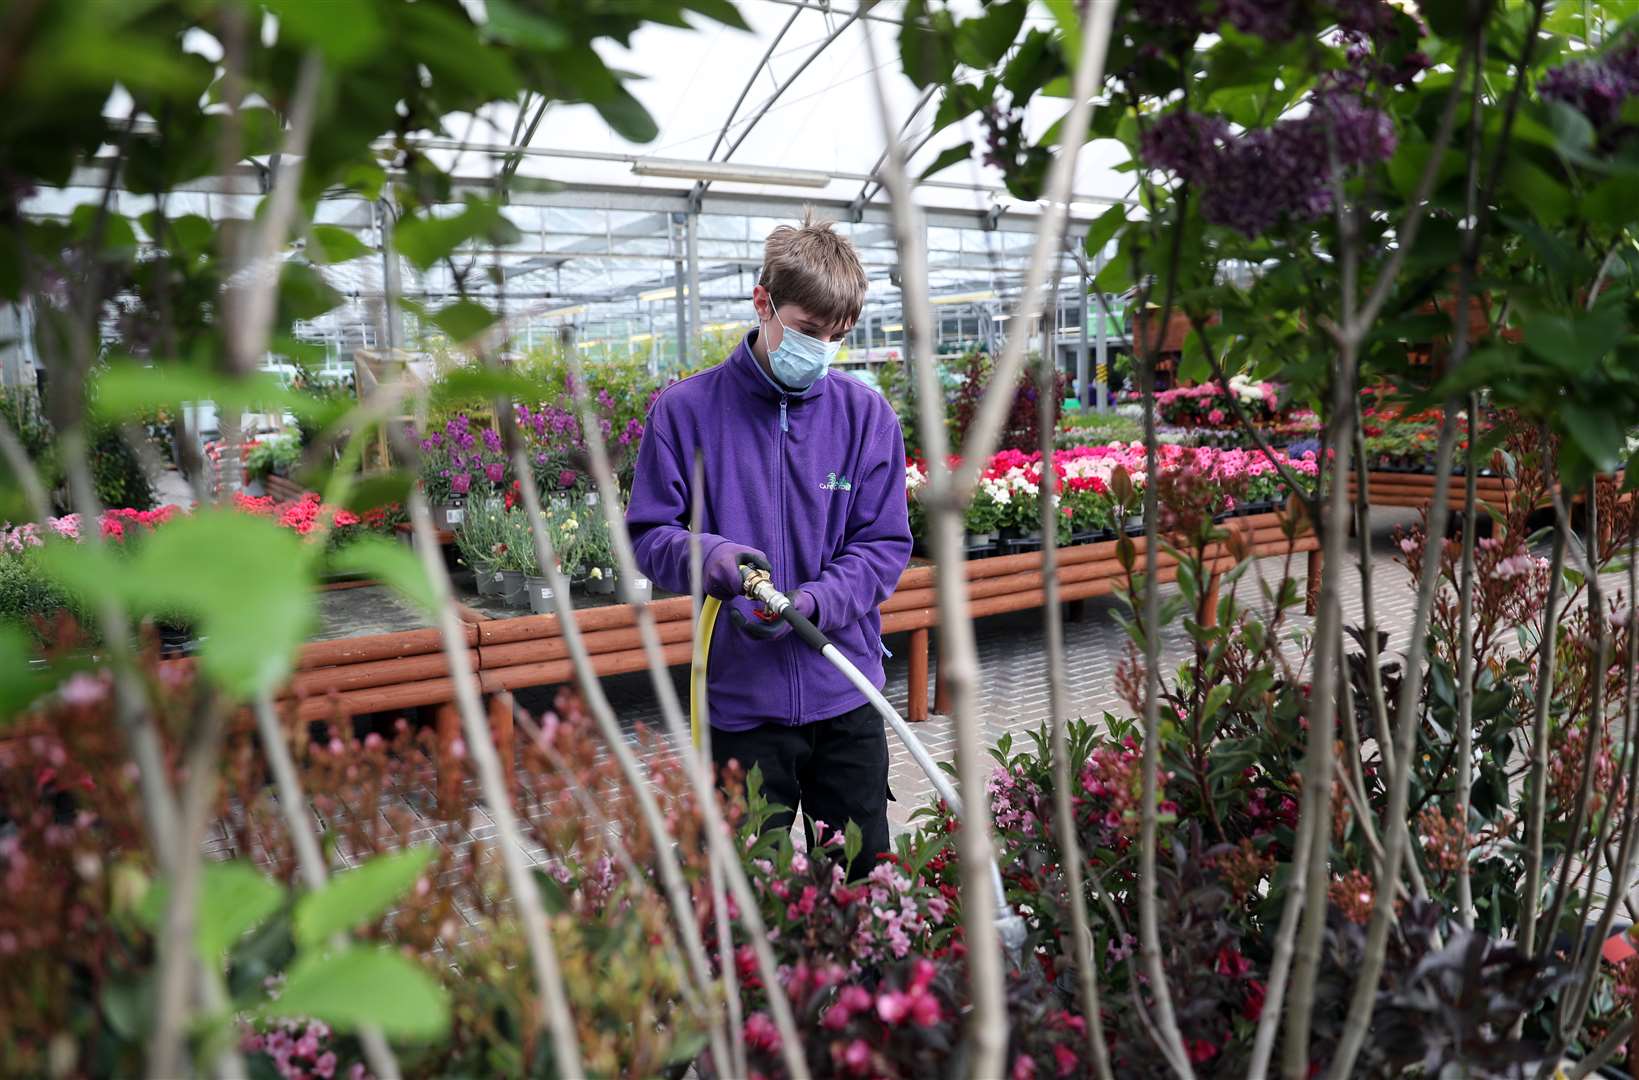 Staff water plants while wearing masks prior to the reopening (Andrew Matthews/PA)